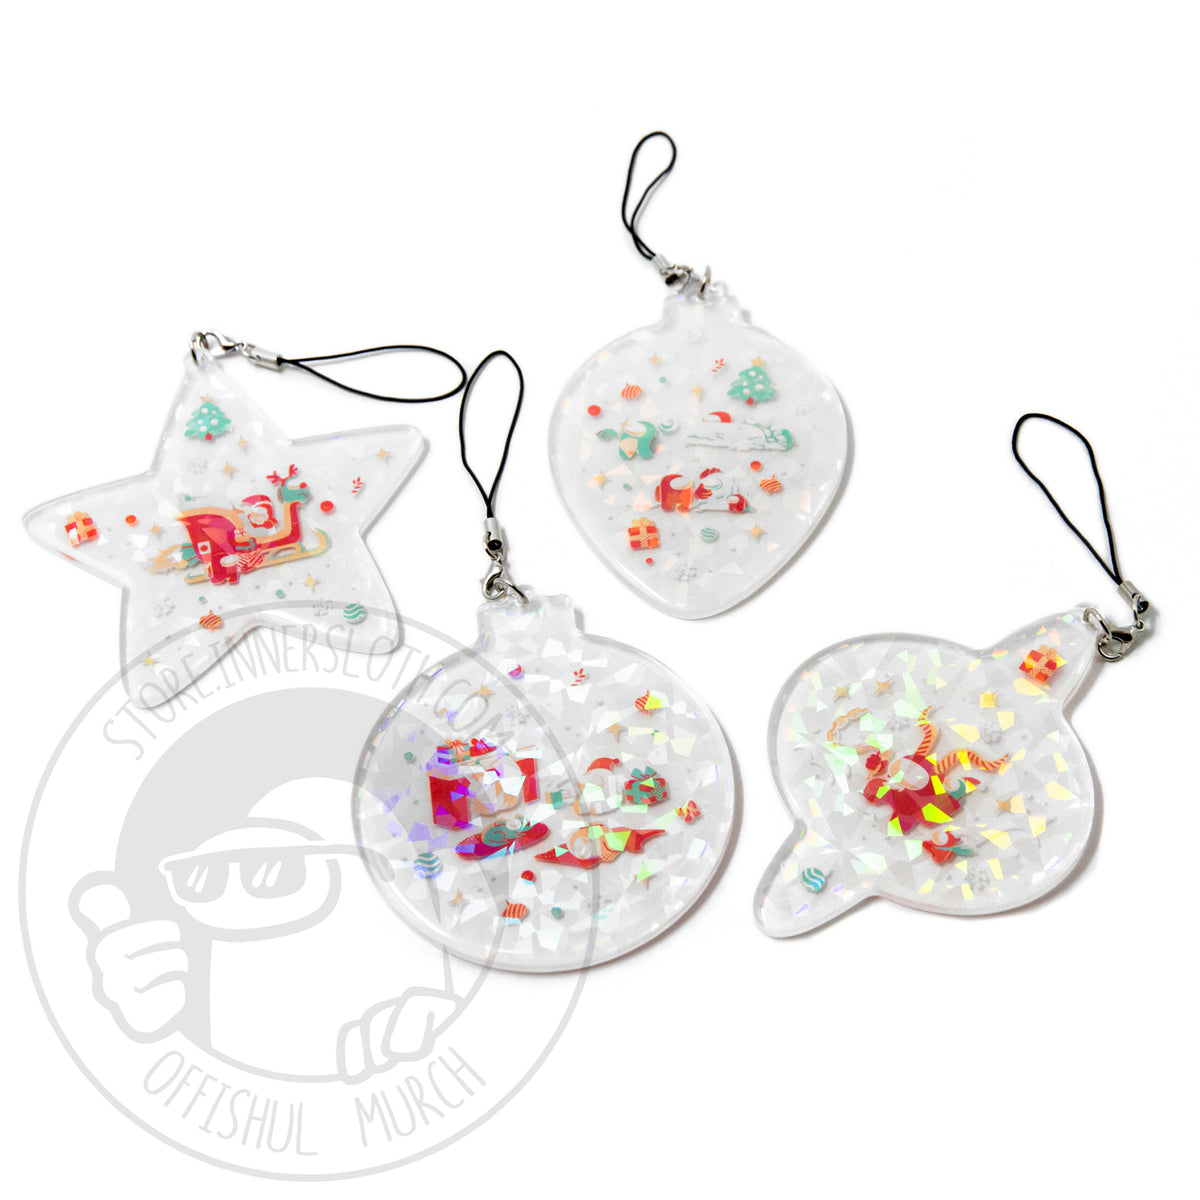 A photograph of four clear acrylic ornaments on a white background. Each ornament has its own shape and special holiday Crewmate illustration, each design is overlaid with iridescent sparkles. The ornaments are attached to a removable lobster clasp strap and jump ring. Designed by Mengmeng Liu.